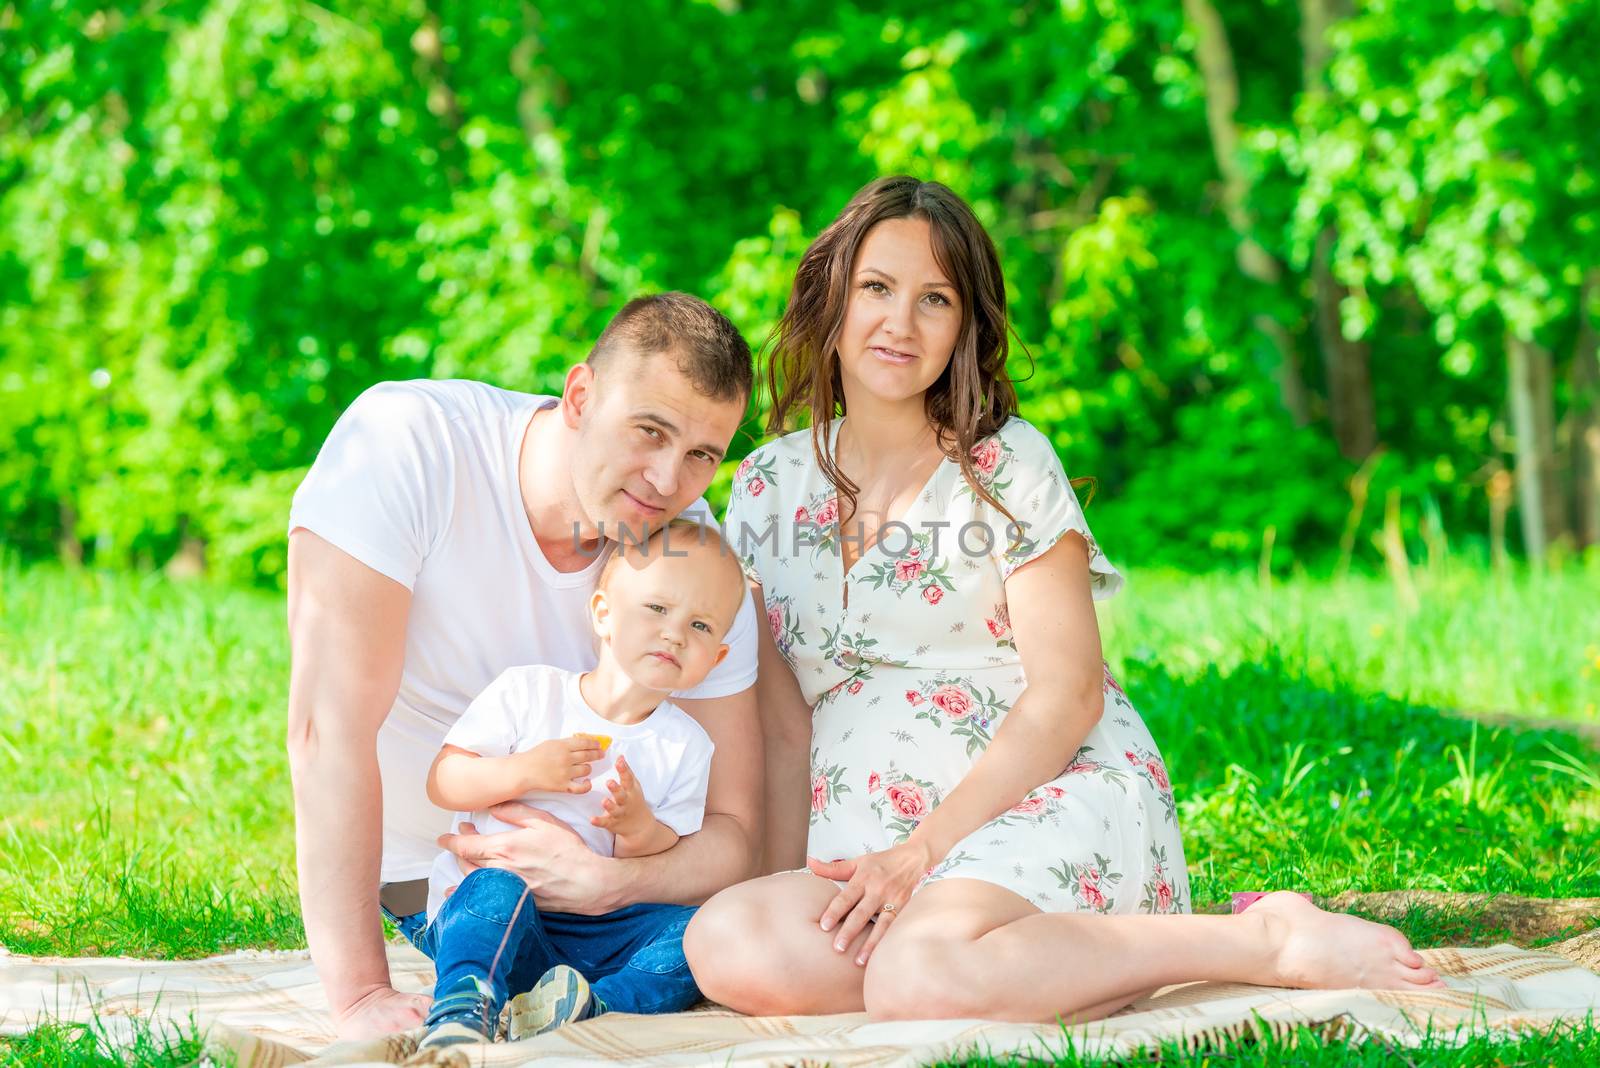 portrait of a young happy family in anticipation of a baby, shooting in a summer park